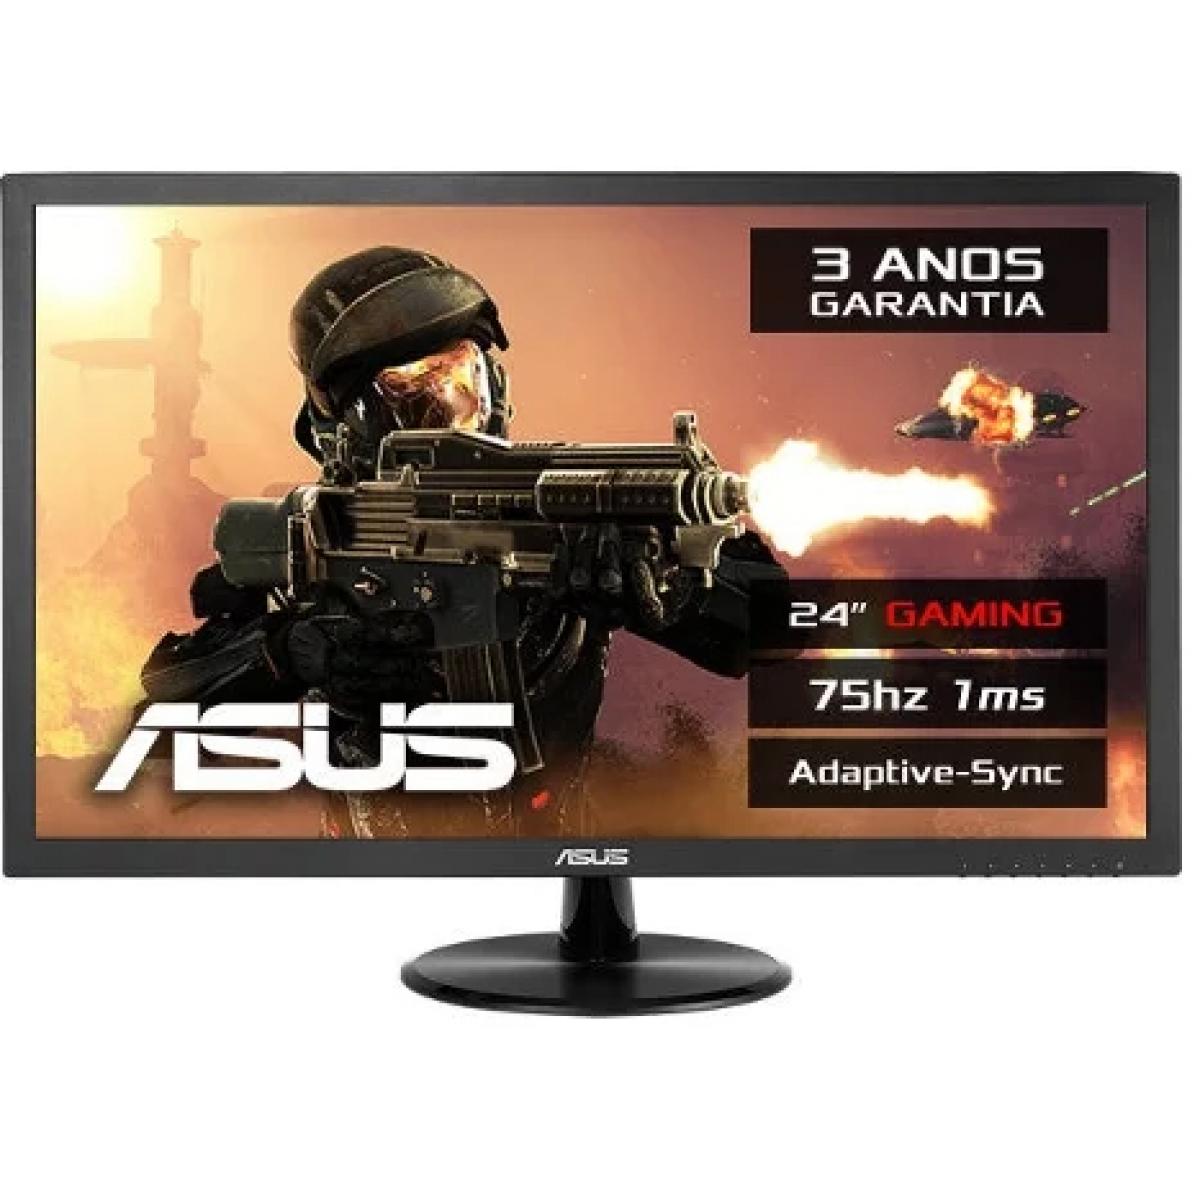 ASUS VP248H 24'' 75HZ 1MS 1080P Gaming Monitor | Taipei For